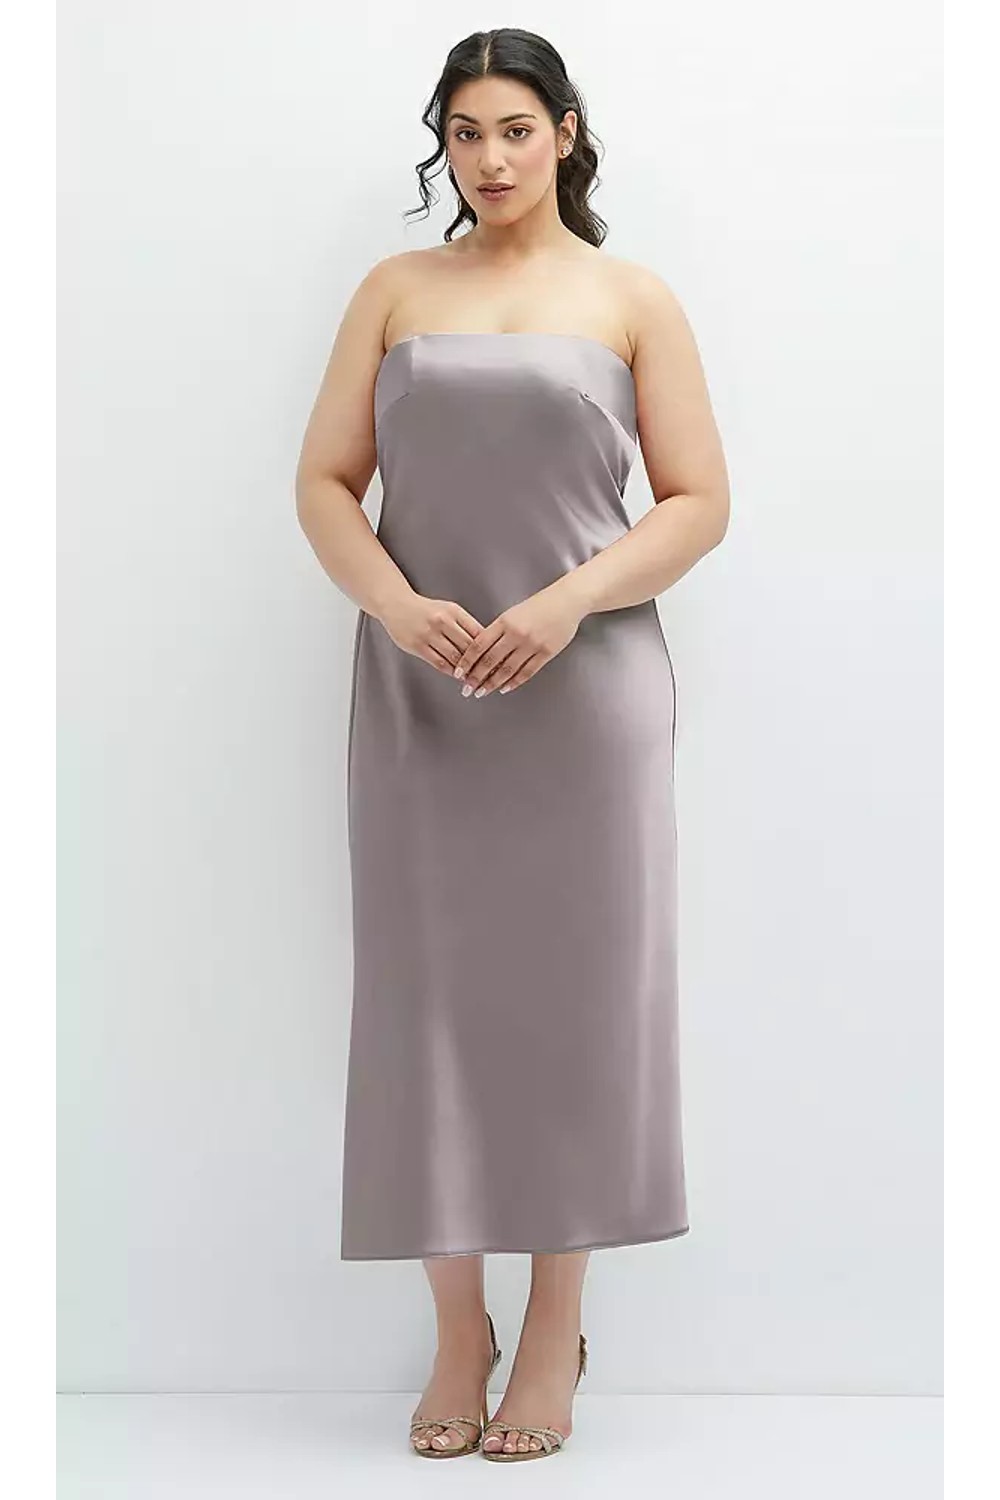 Goldie Cashmere Bridesmaid Dress by Dessy